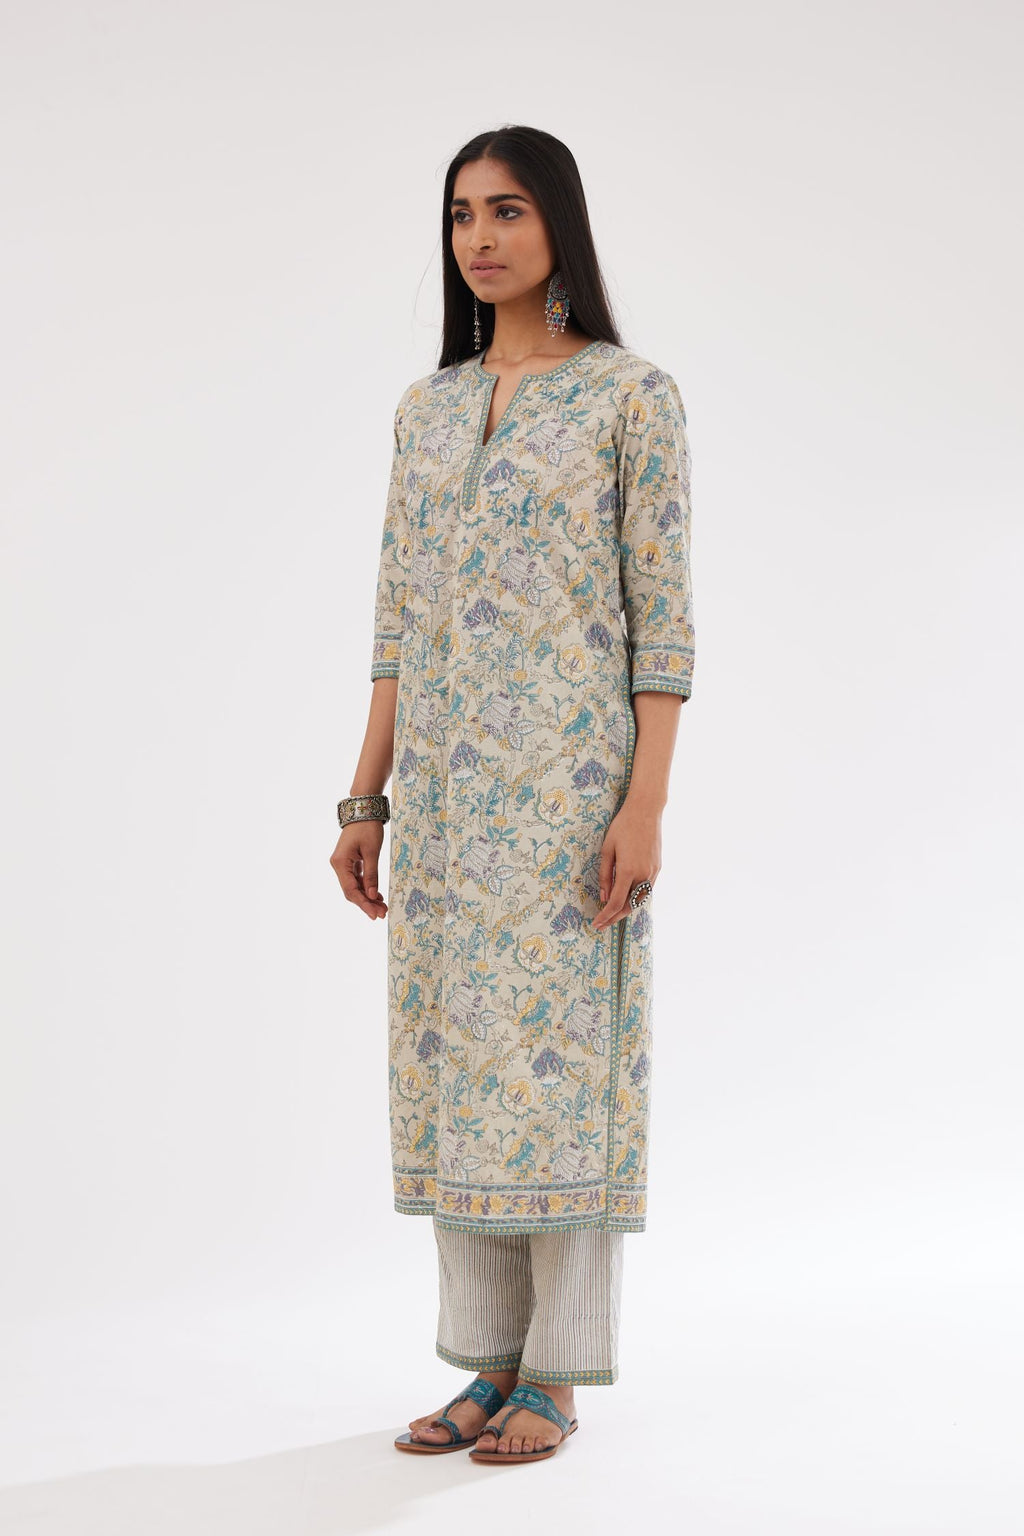 Grey and blue straight kurta with all-over chintz block print & side slits, paired with grey and blue printed stripe cotton straight pants with a narrow printed border at the hem.